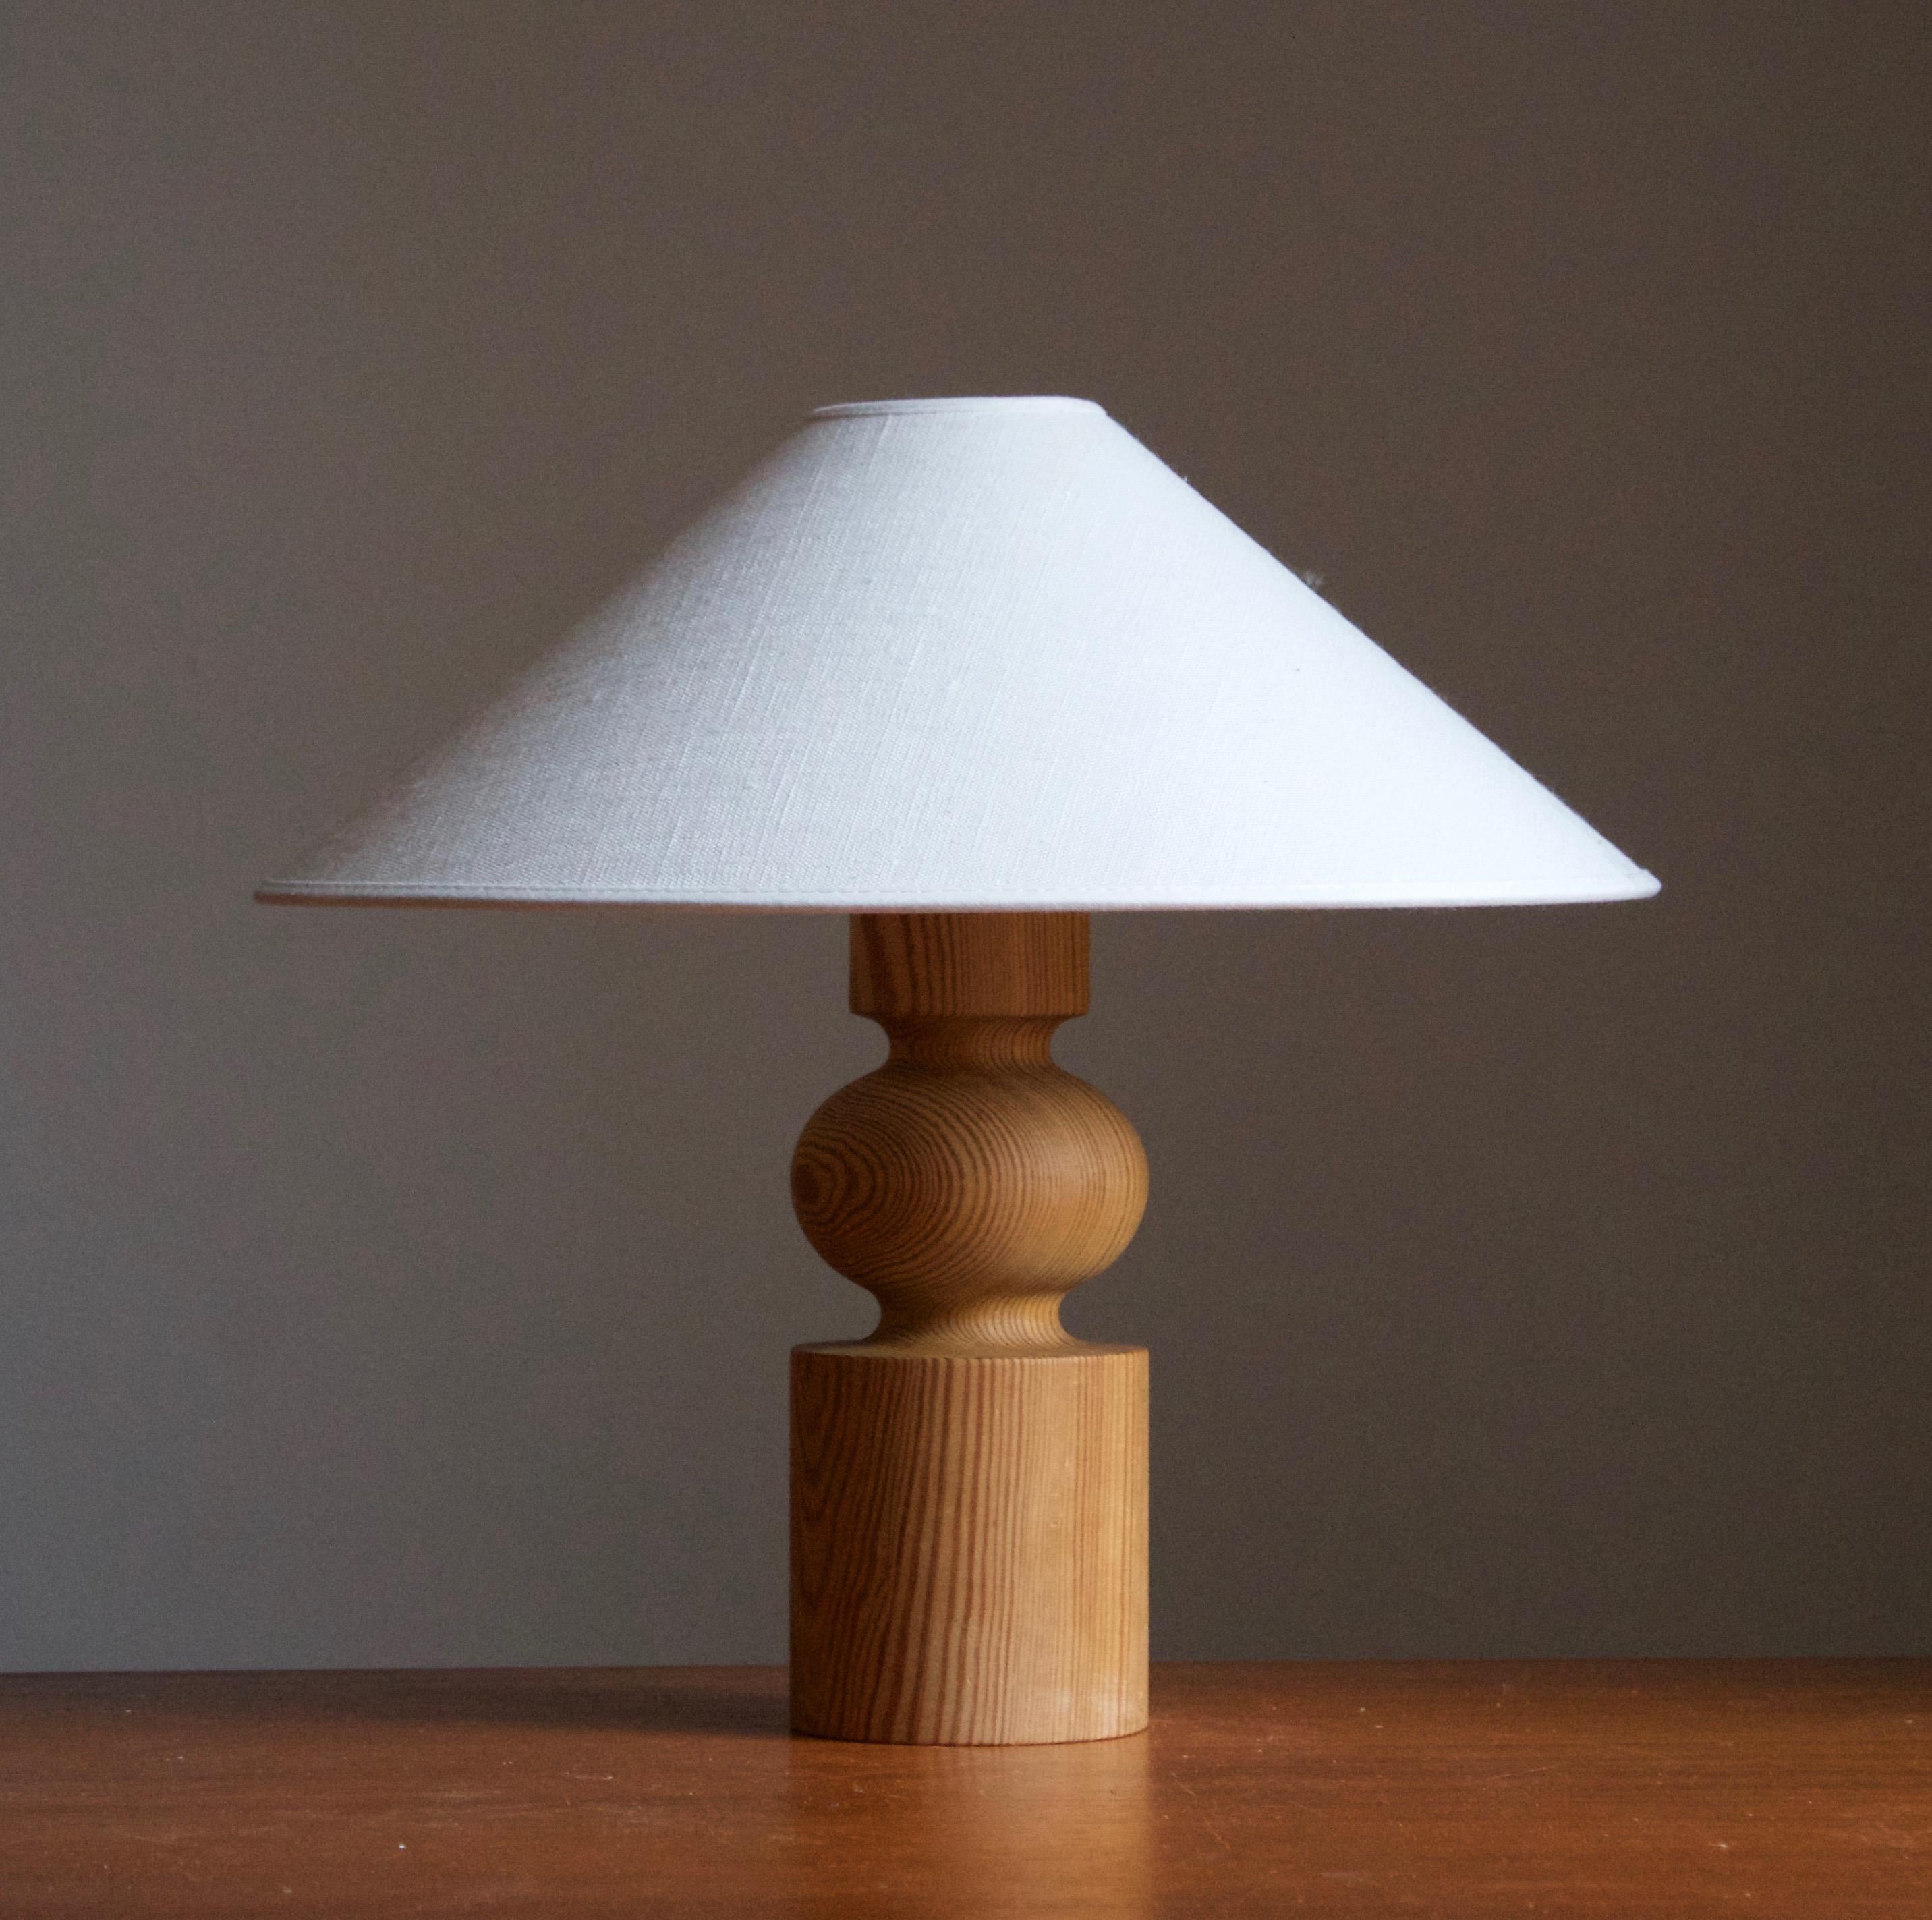 A sculptural solid pine table lamp. Designed by Uno Kristiansson, for Luxus, Sweden, 1970s. Branded.

Stated dimensions exclude lampshade, height includes socket. Sold without lampshade.

Other designers of the period include Axel Einar Hjorth,